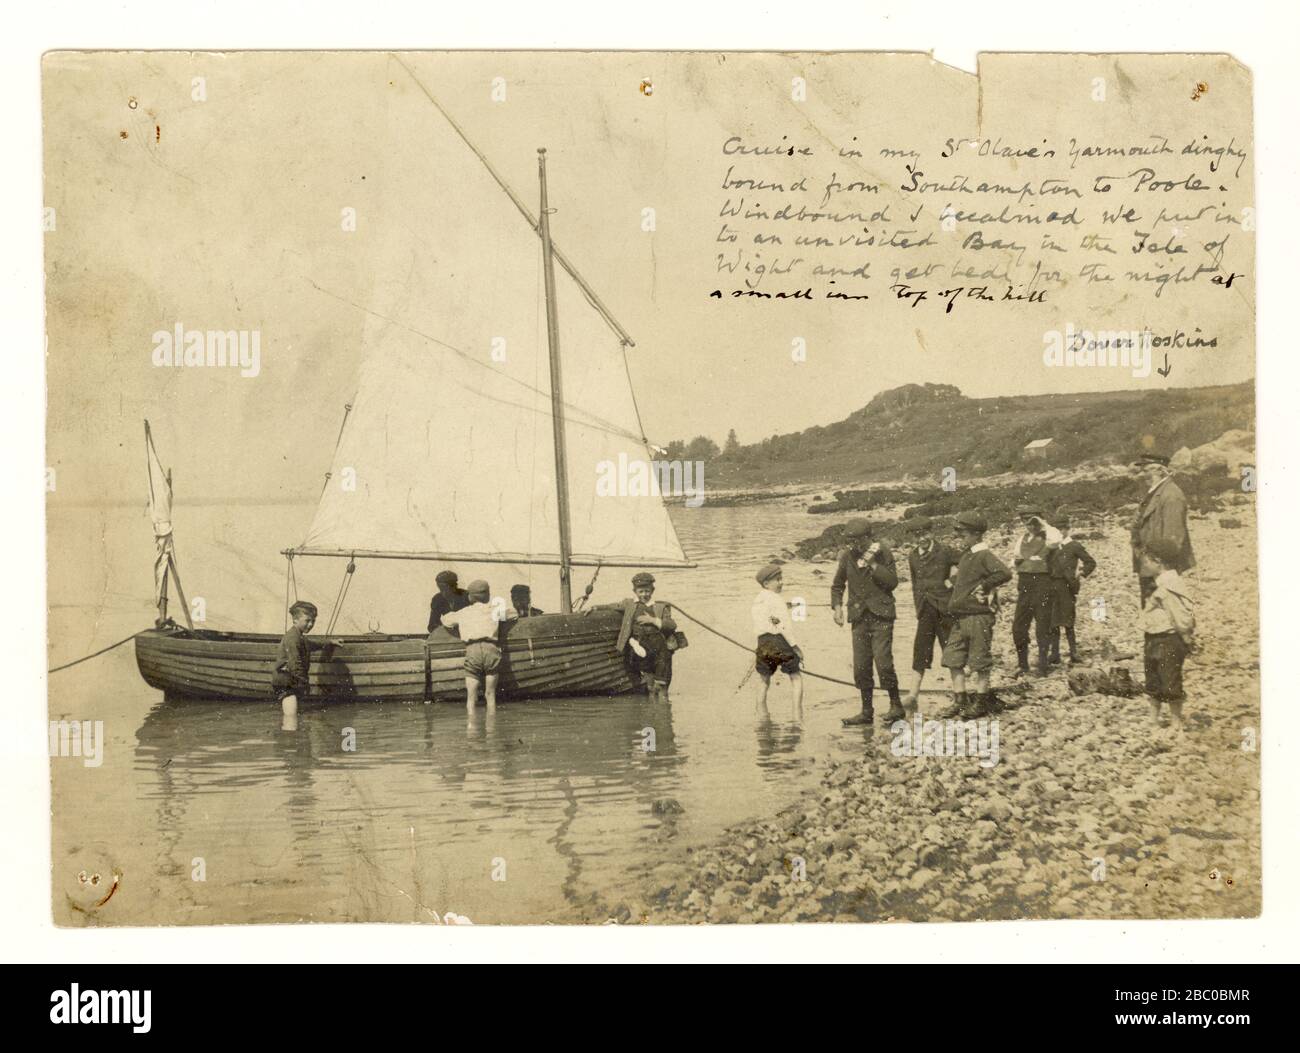 Original Edwardian era photo of charming tranquil coastal scene in early 1900's photo of a sailing cruise in St. Olave Yarmouth dinghy moored off a beach on Isle of Wight, small boys help whilst a man known as 'Dover Hoskins' looks on,  U.K. Stock Photo